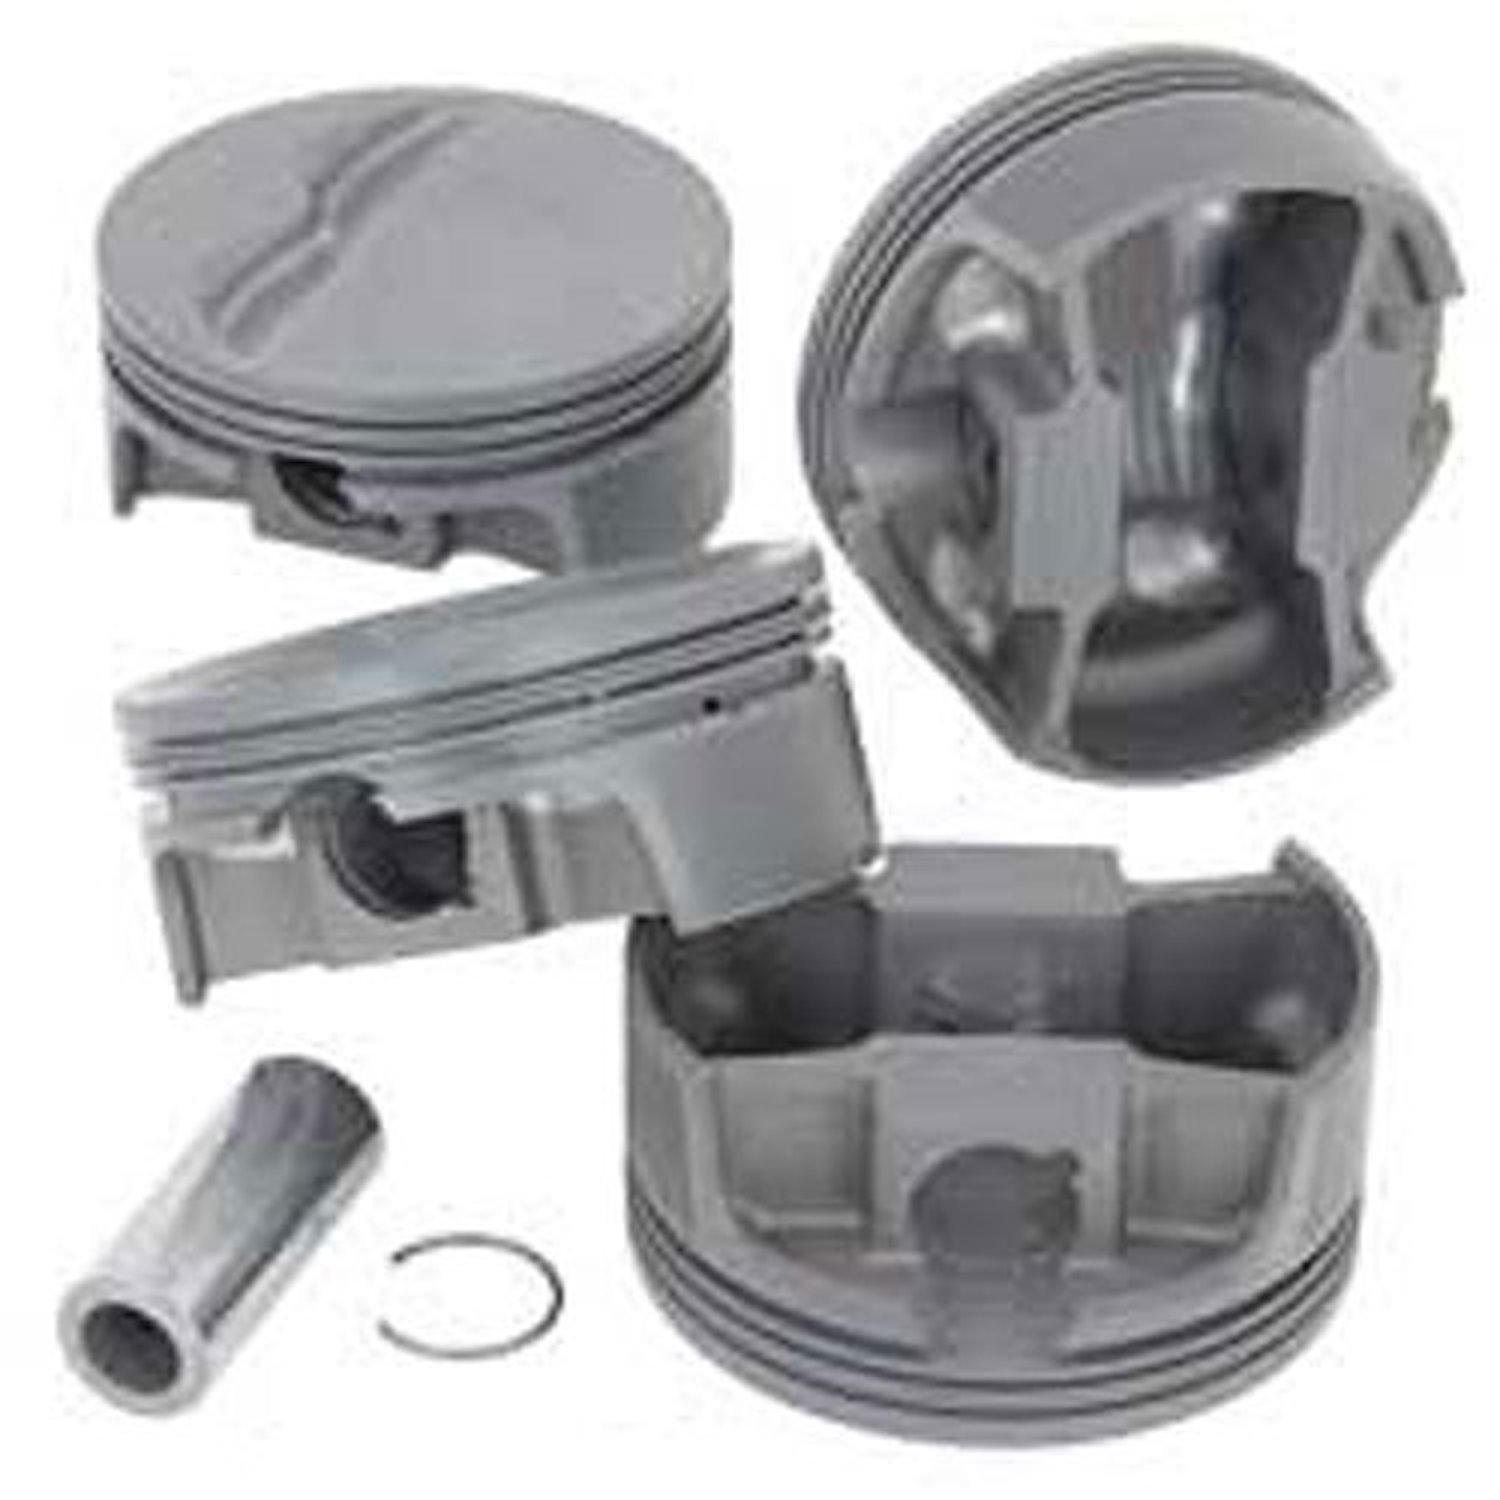 Hemi 6.1L Drop-In Forged Replacement Piston Kit Also Works With 6.4L Cylinder Head